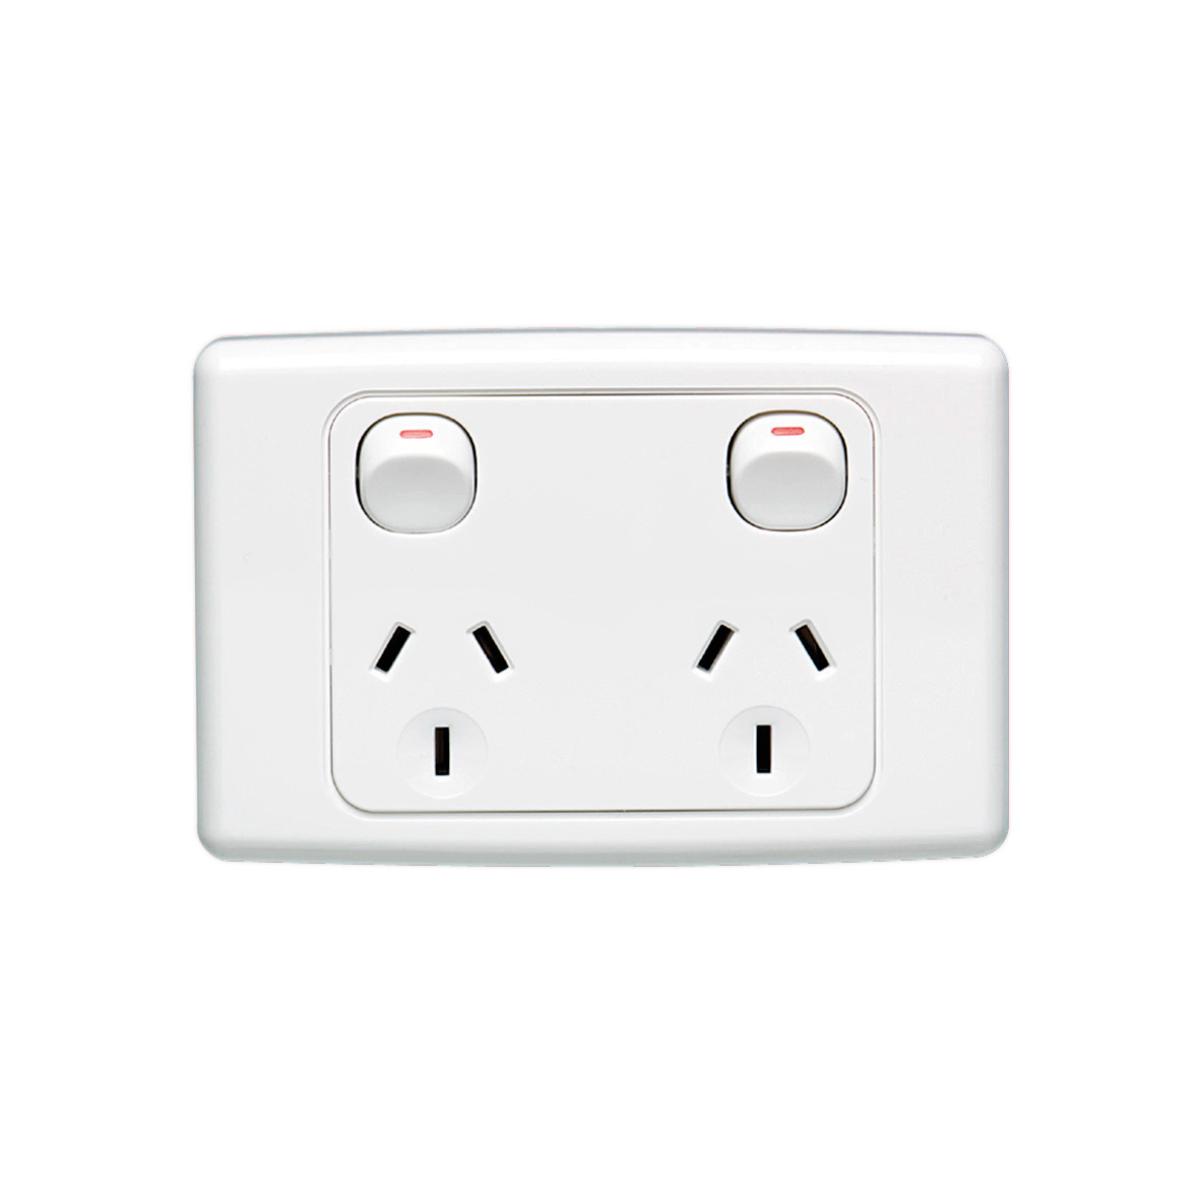 GPO SOCKET SWT TWIN 10A 250V WHITE